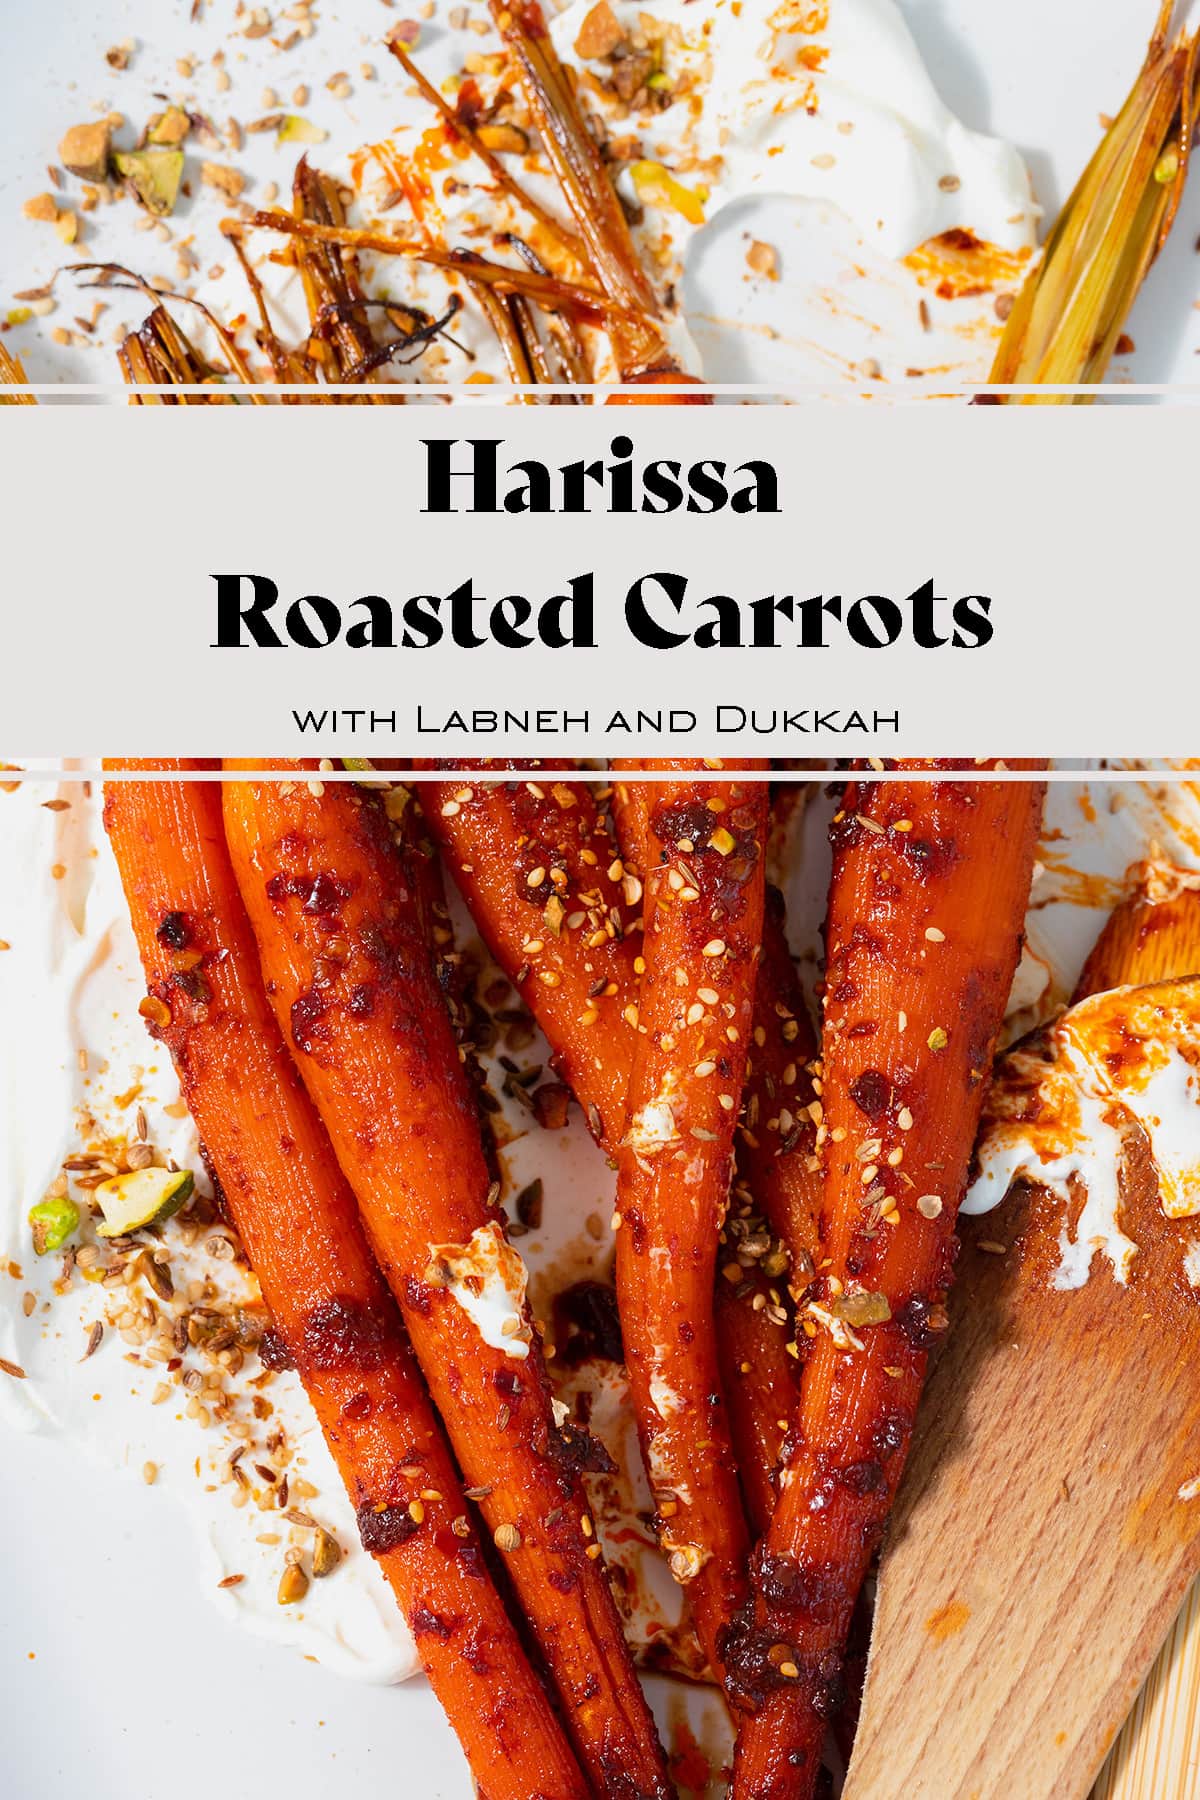 Harissa Roasted Carrots with Labneh and Dukkah